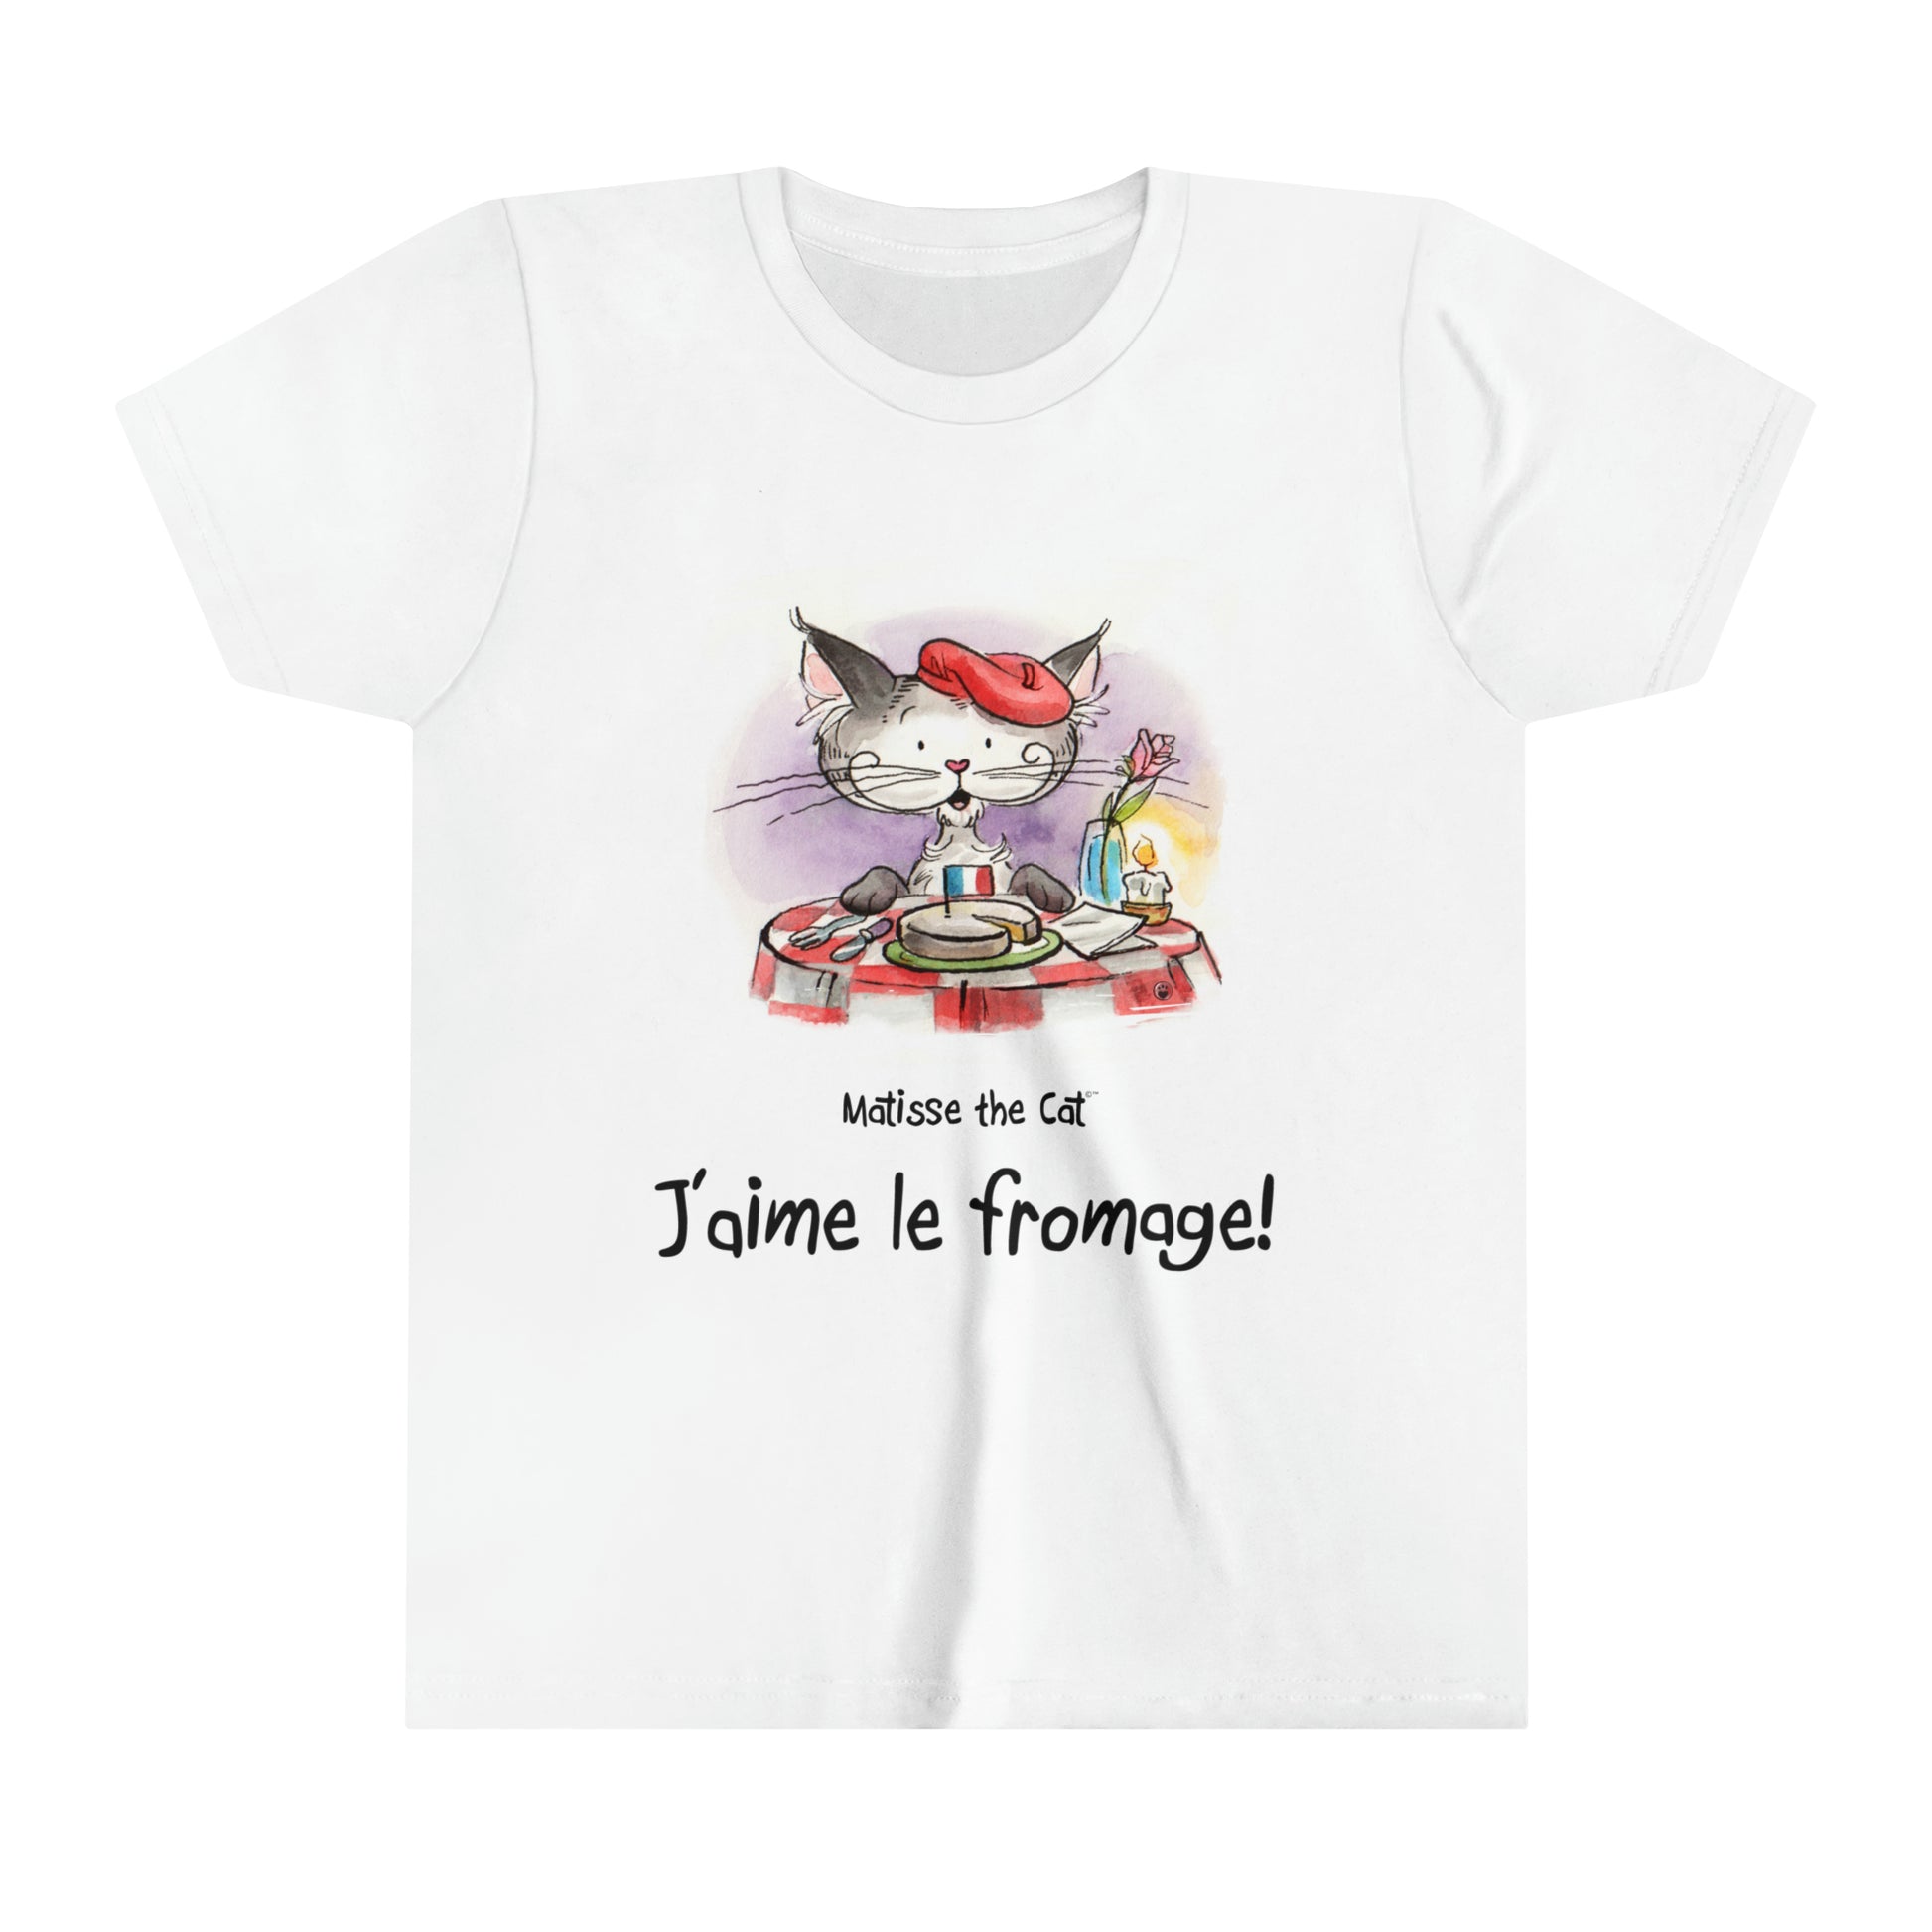 A white official, Matisse the Cat children’s t-shirt with the slogan ‘Jaime le fromage ‘ showcases Matisse sitting at a French bistro table preparing to eat cheese.